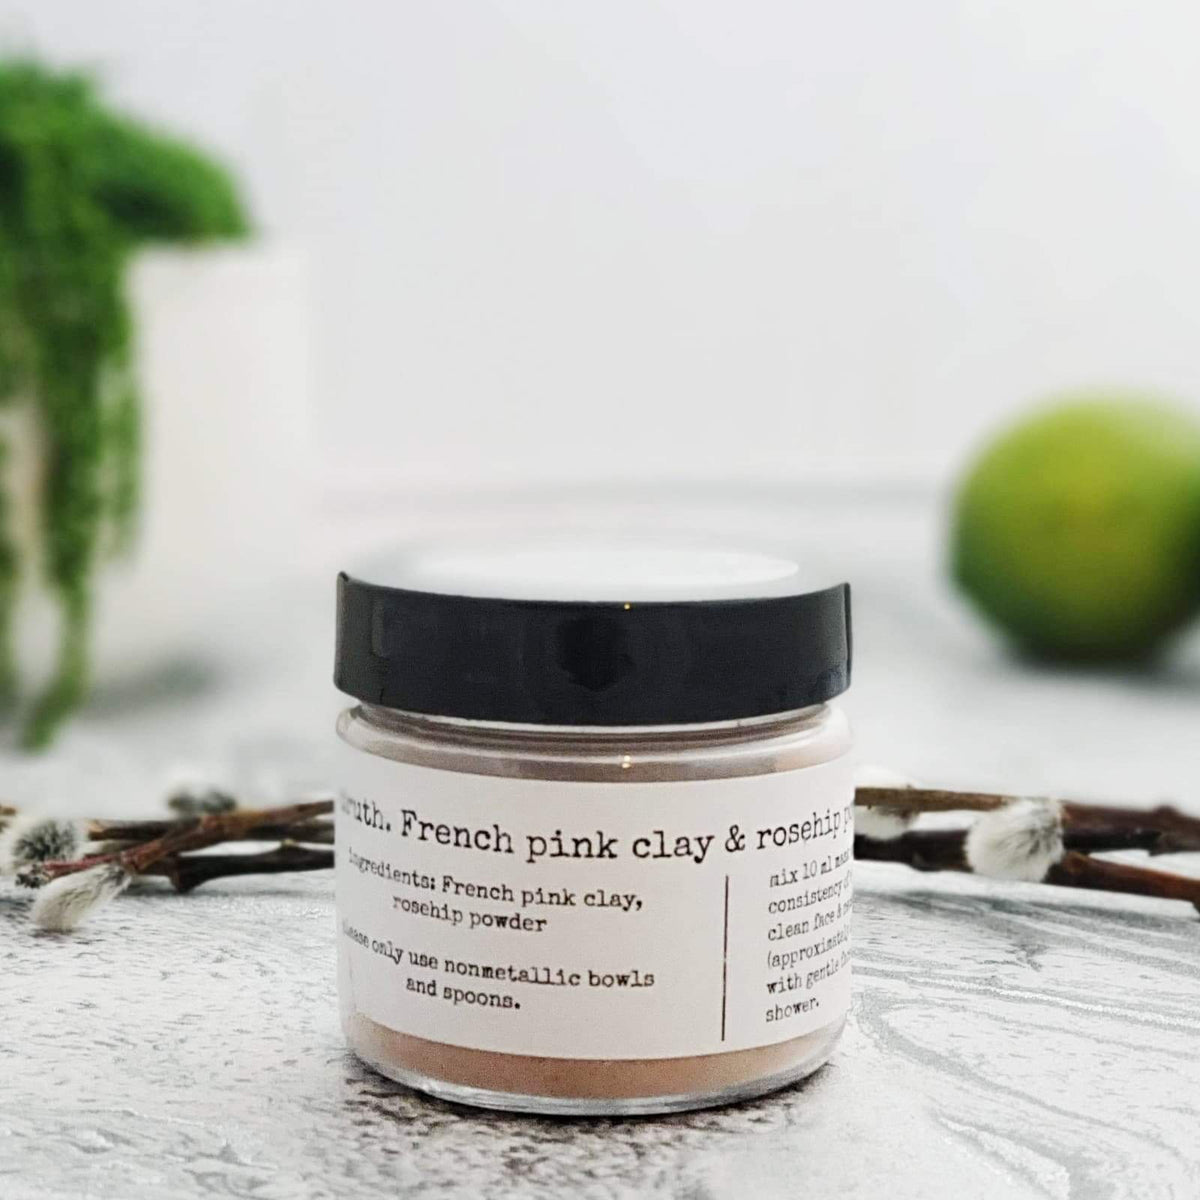 Truth French Pink Clay & Rosehip Face Mask